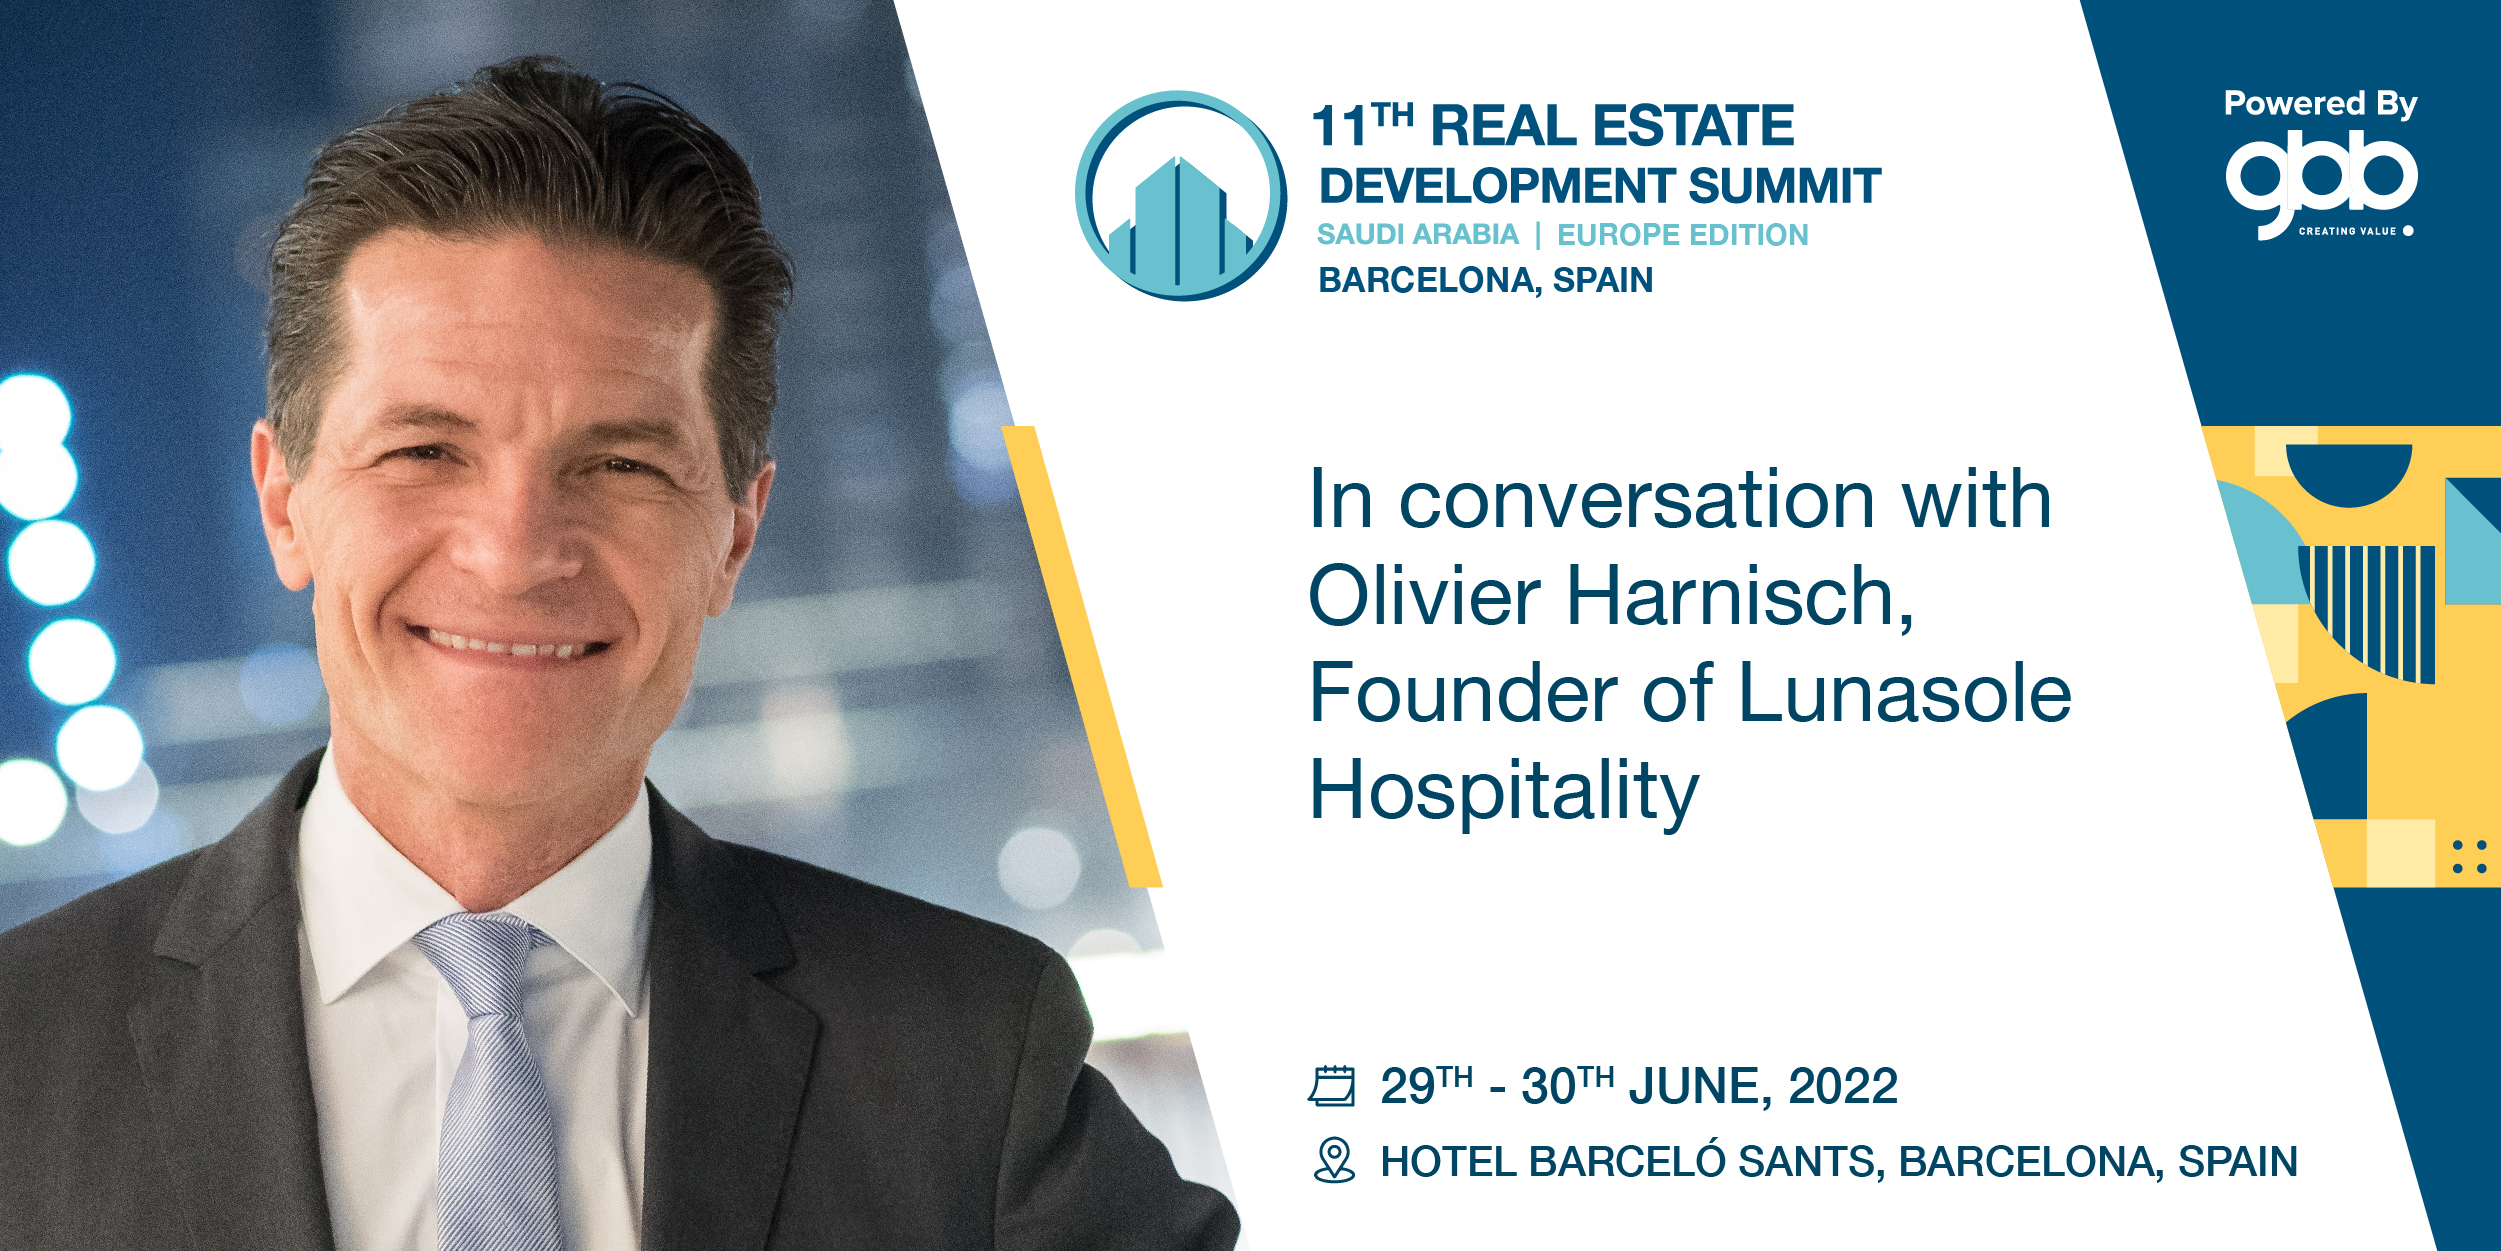 In conversation with Olivier Harnisch, Founder of Lunasole Hospitality